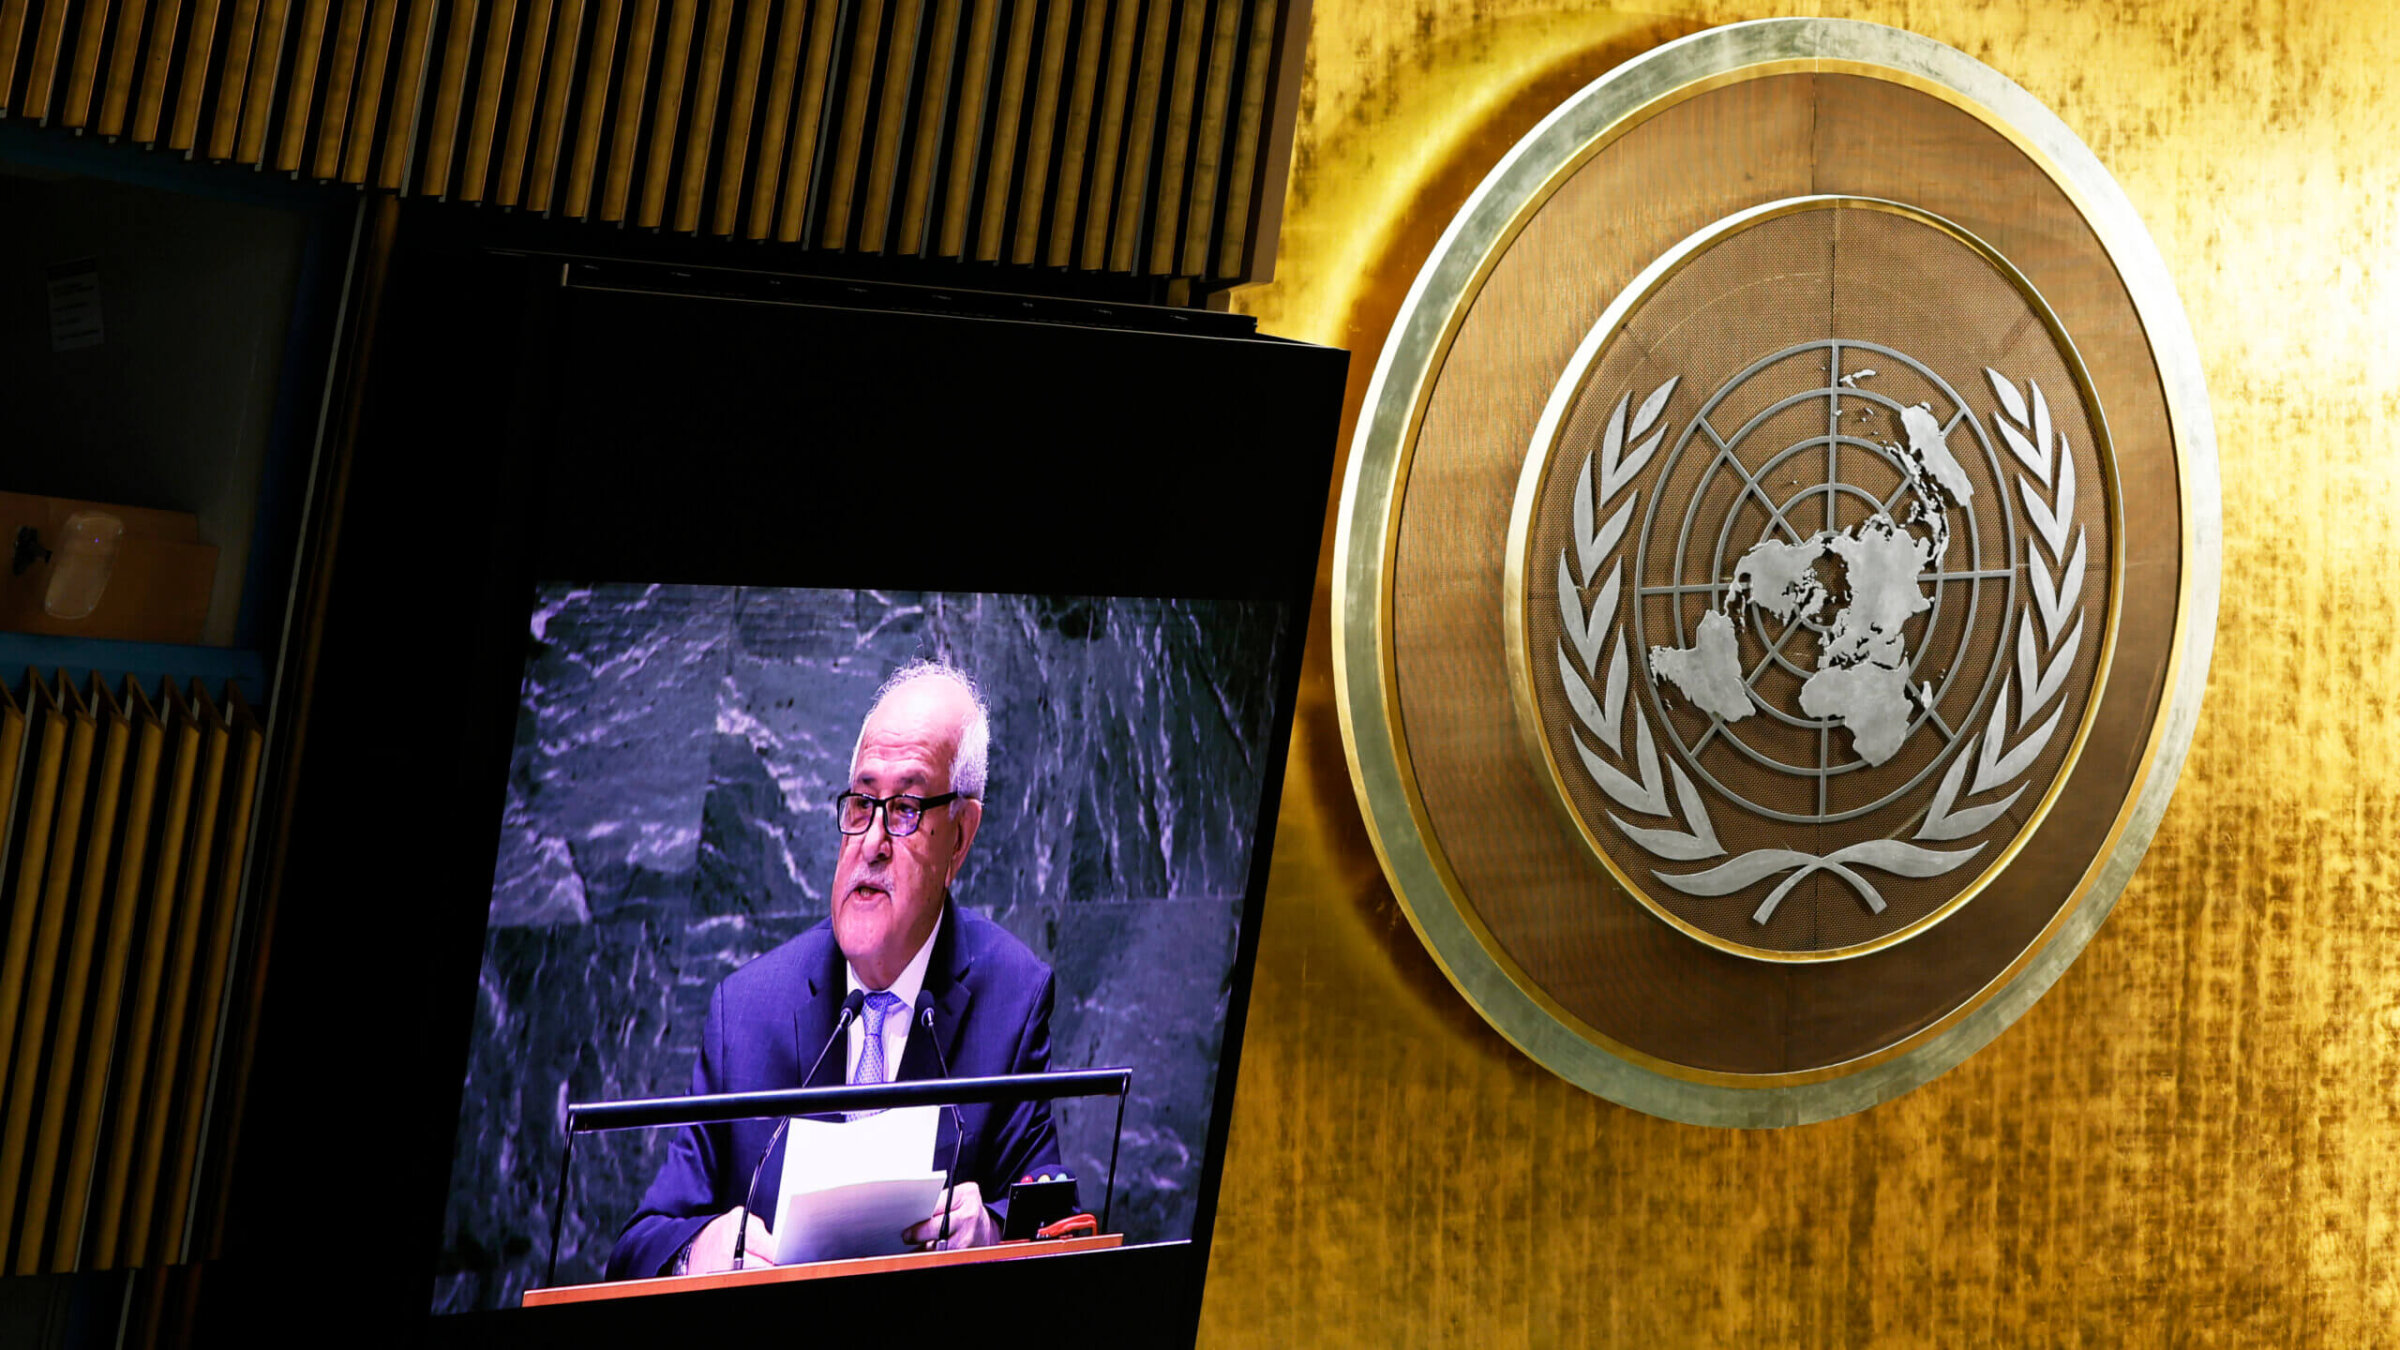 Palestinian Permanent Observer to the United Nations Riyad H. Mansour speaks during the General Assembly at the United Nations headquarters in New York City Nov. 28. 